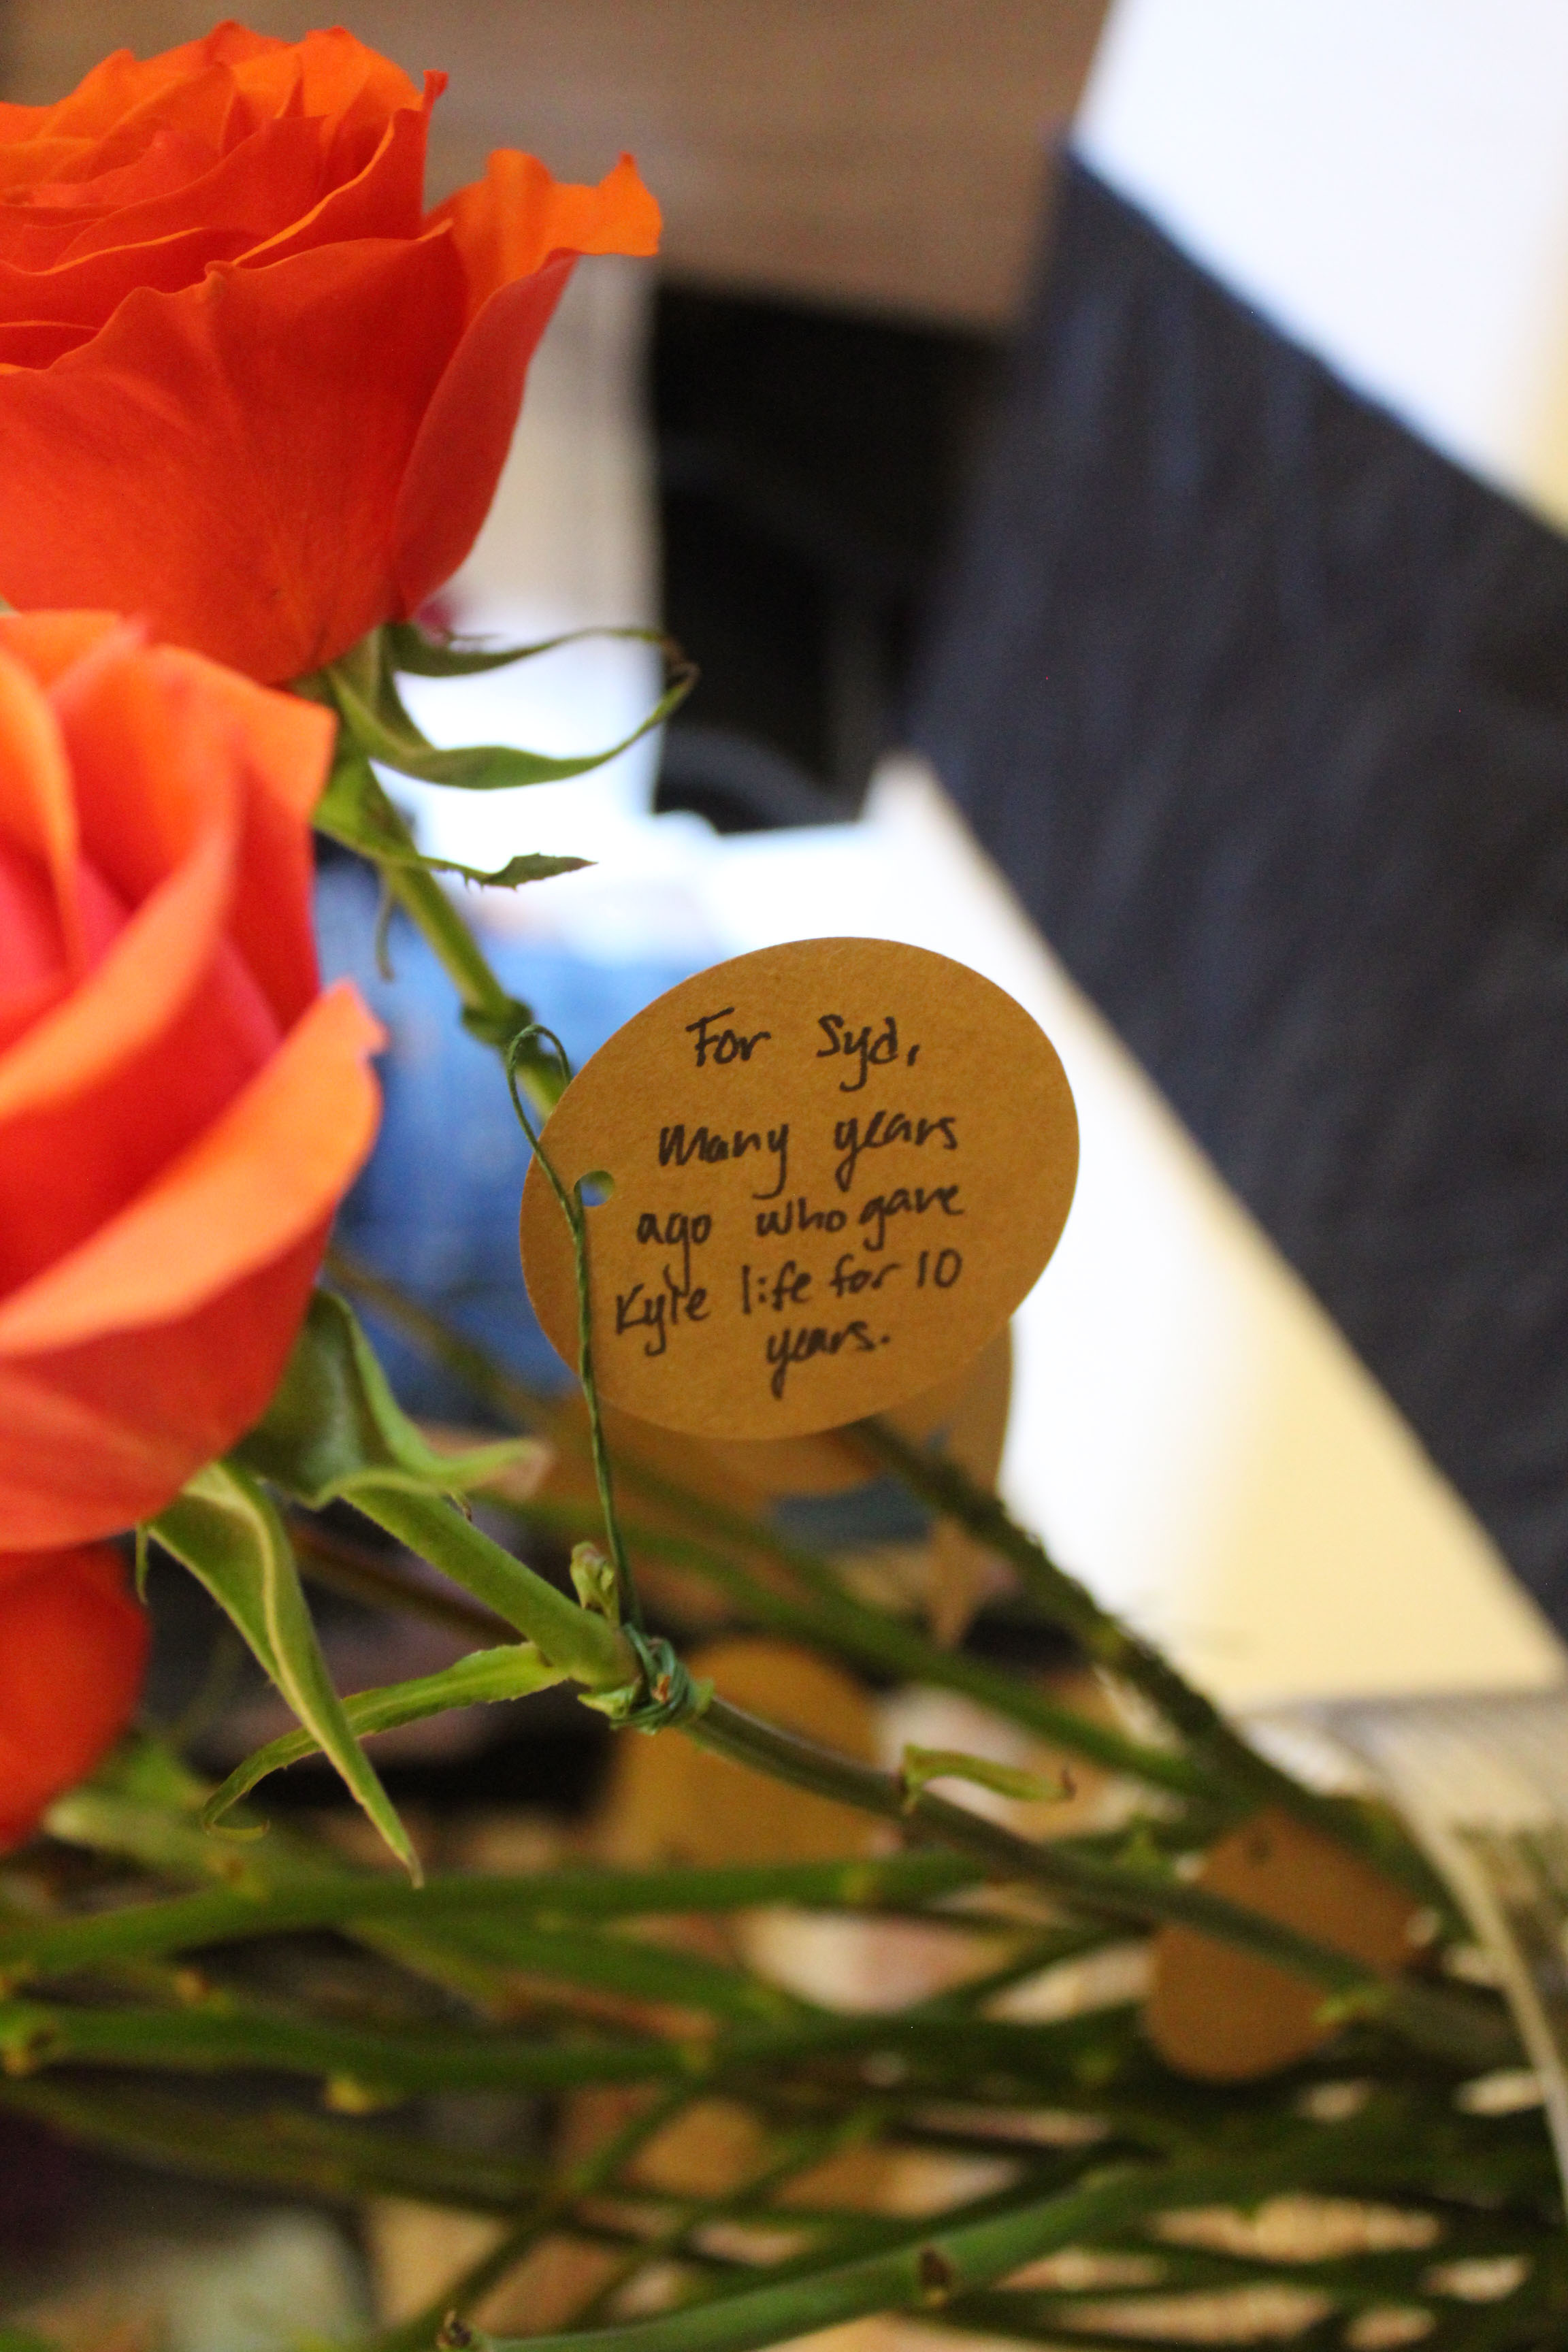 dedication message attached to rose "For Syd, many years ago who gave Kyle life for 10 years"